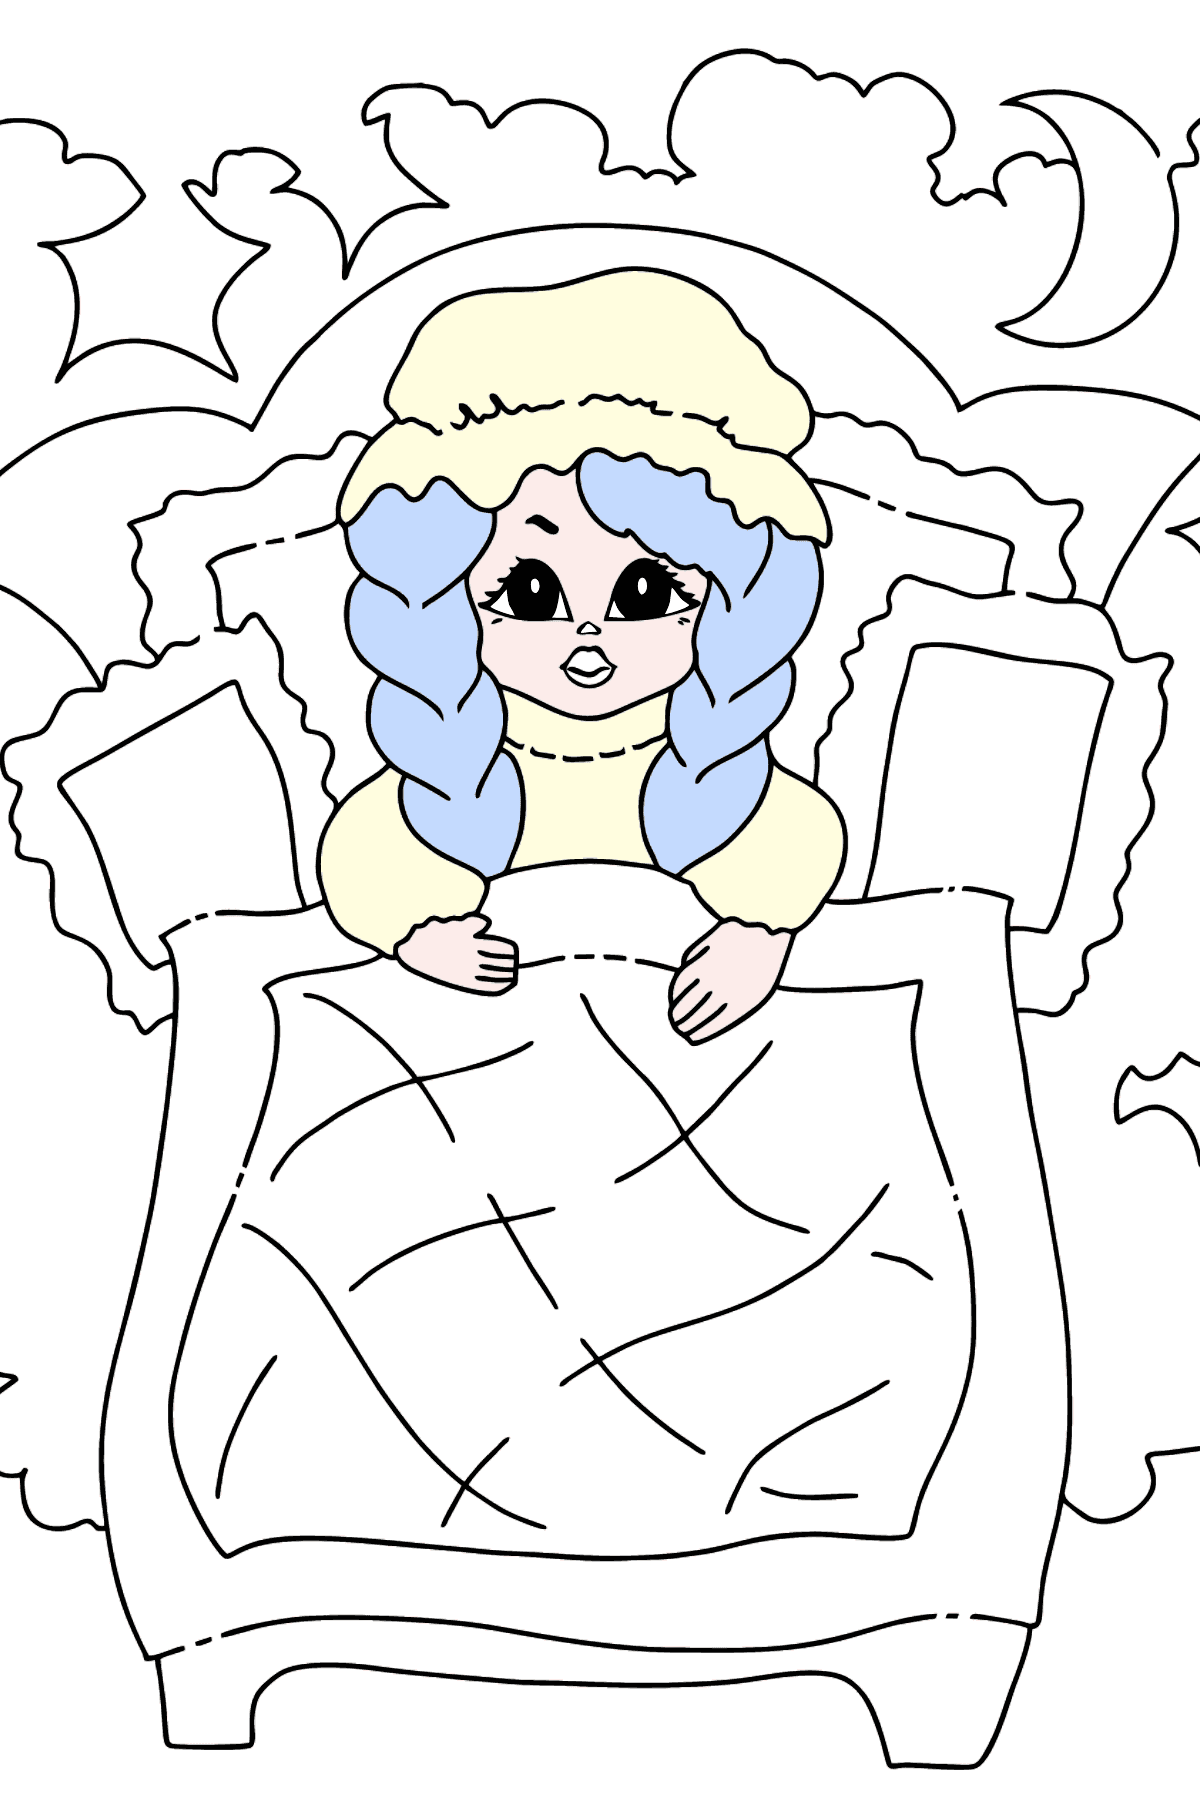 Coloring Picture - A Princess in Bed - Coloring Pages for Kids